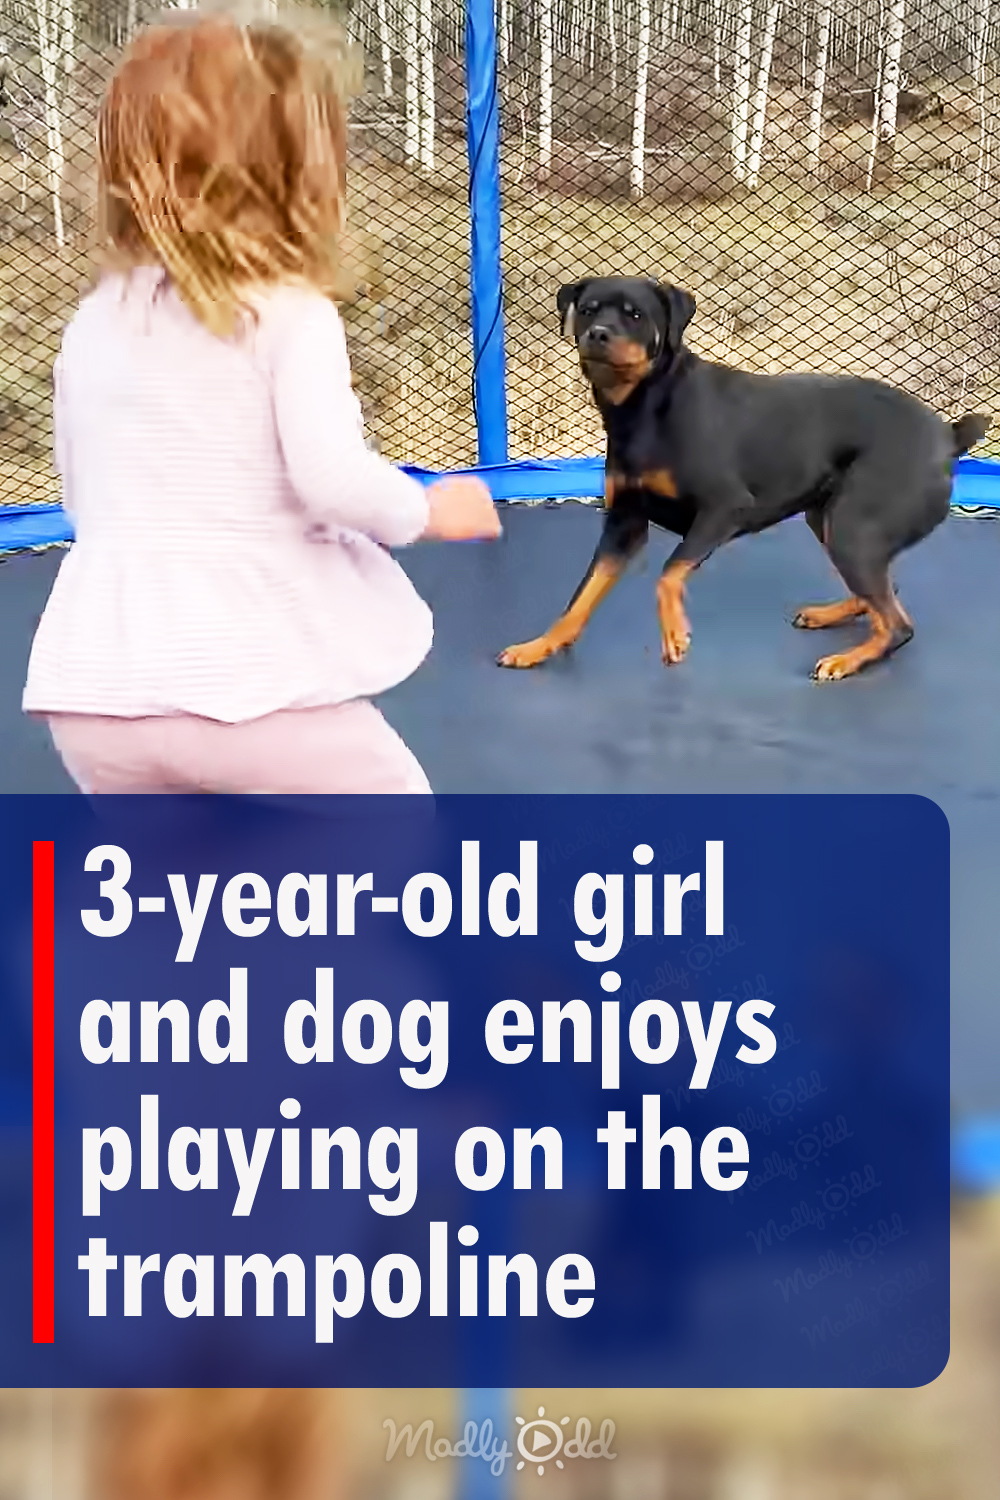 3-year-old girl and dog playing on the trampoline